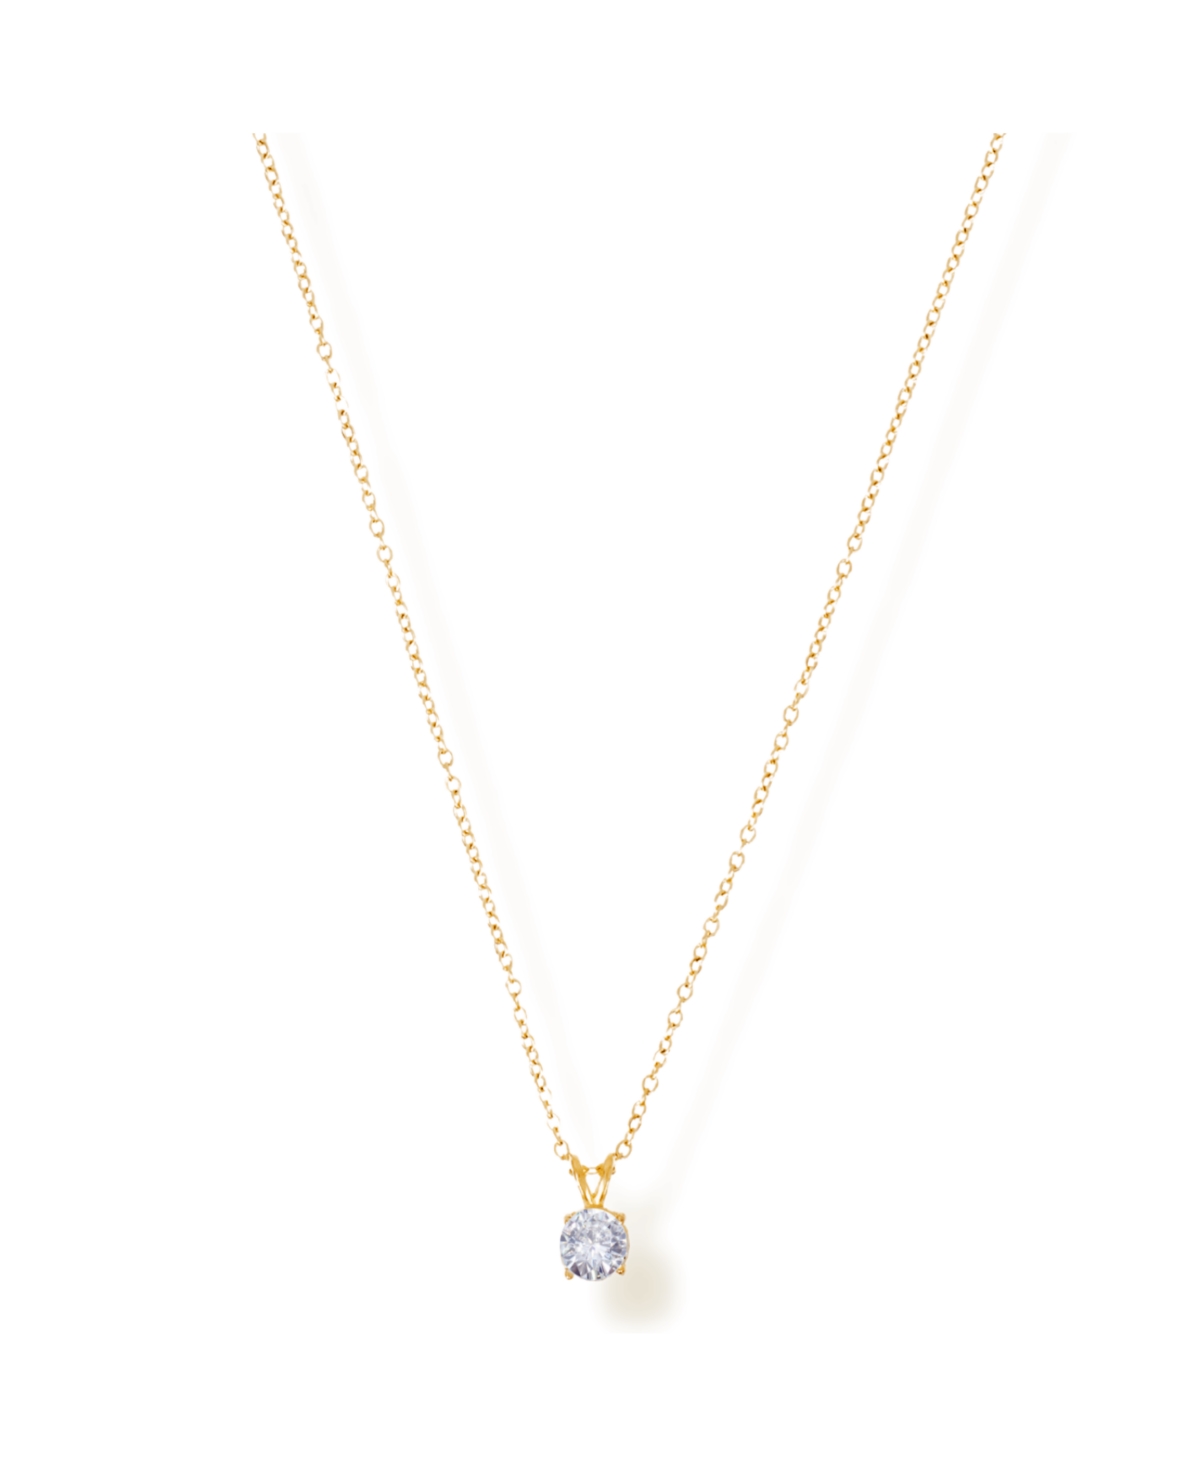 Lillian Necklace - Gold